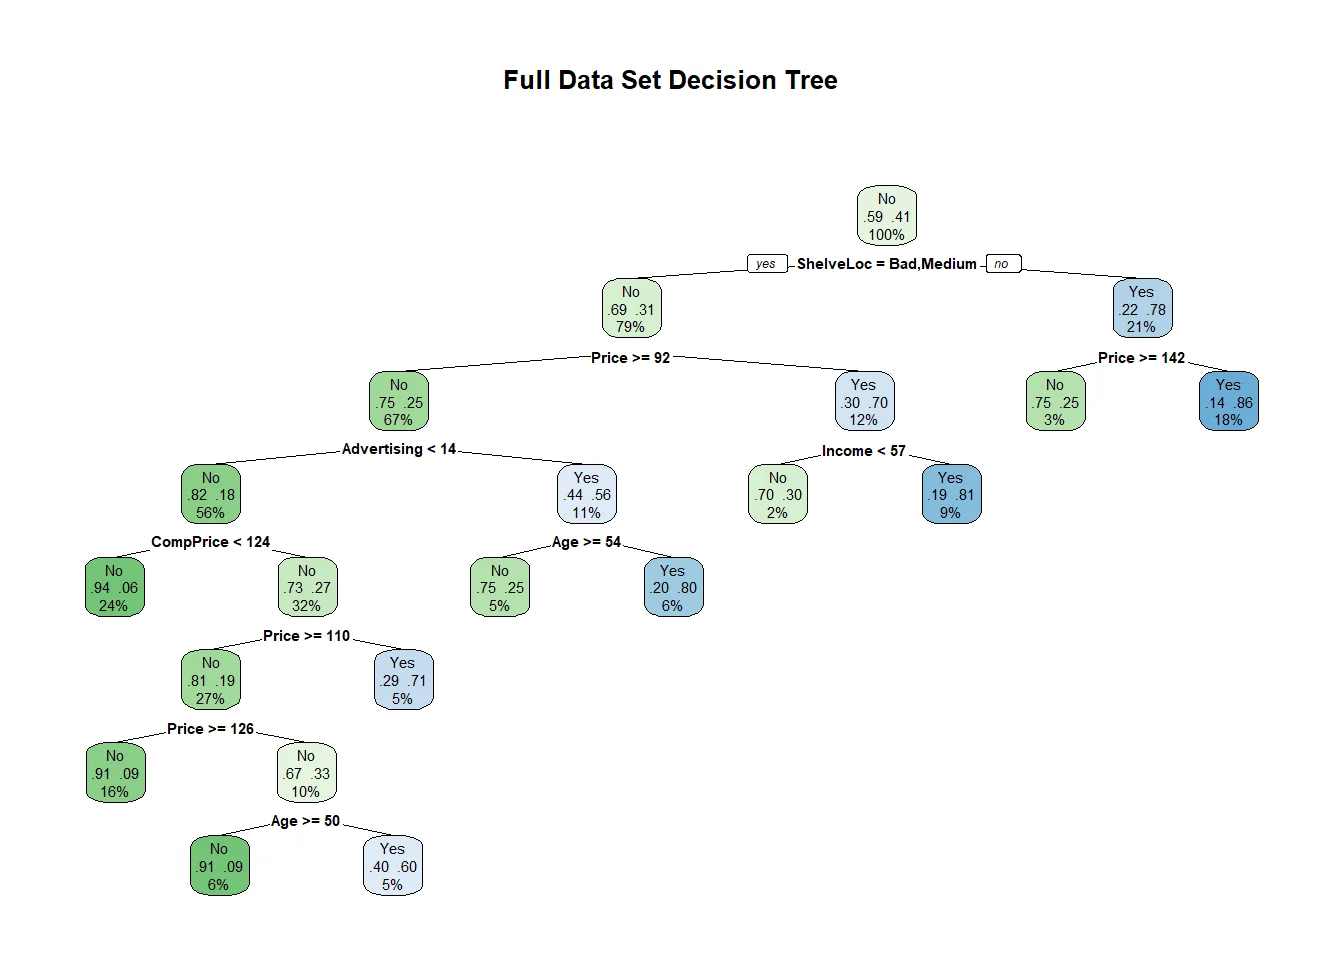 An image depicting a "Full Data Set Decision Tree". The decision tree consists of interconnected nodes with decision criteria and outcomes. 